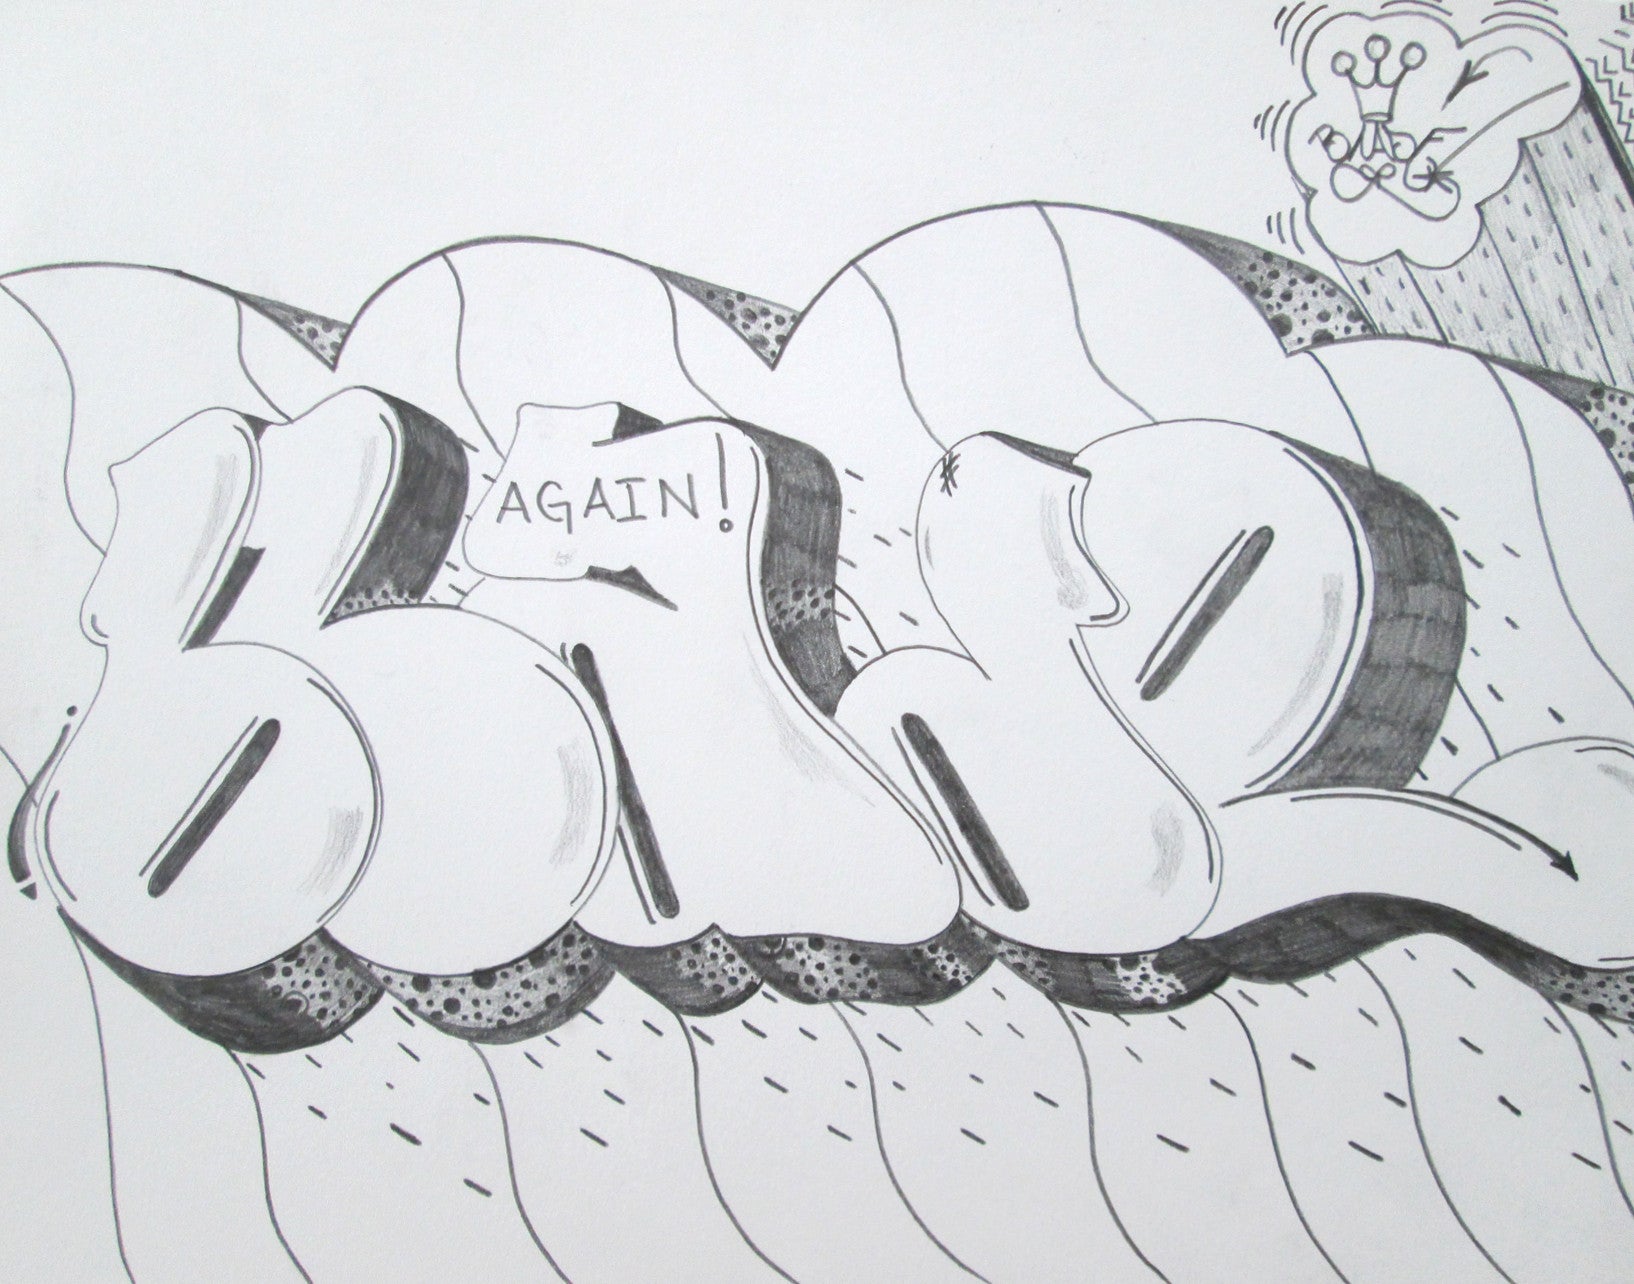 BLADE - "Bubble Letter Style" -  Drawing